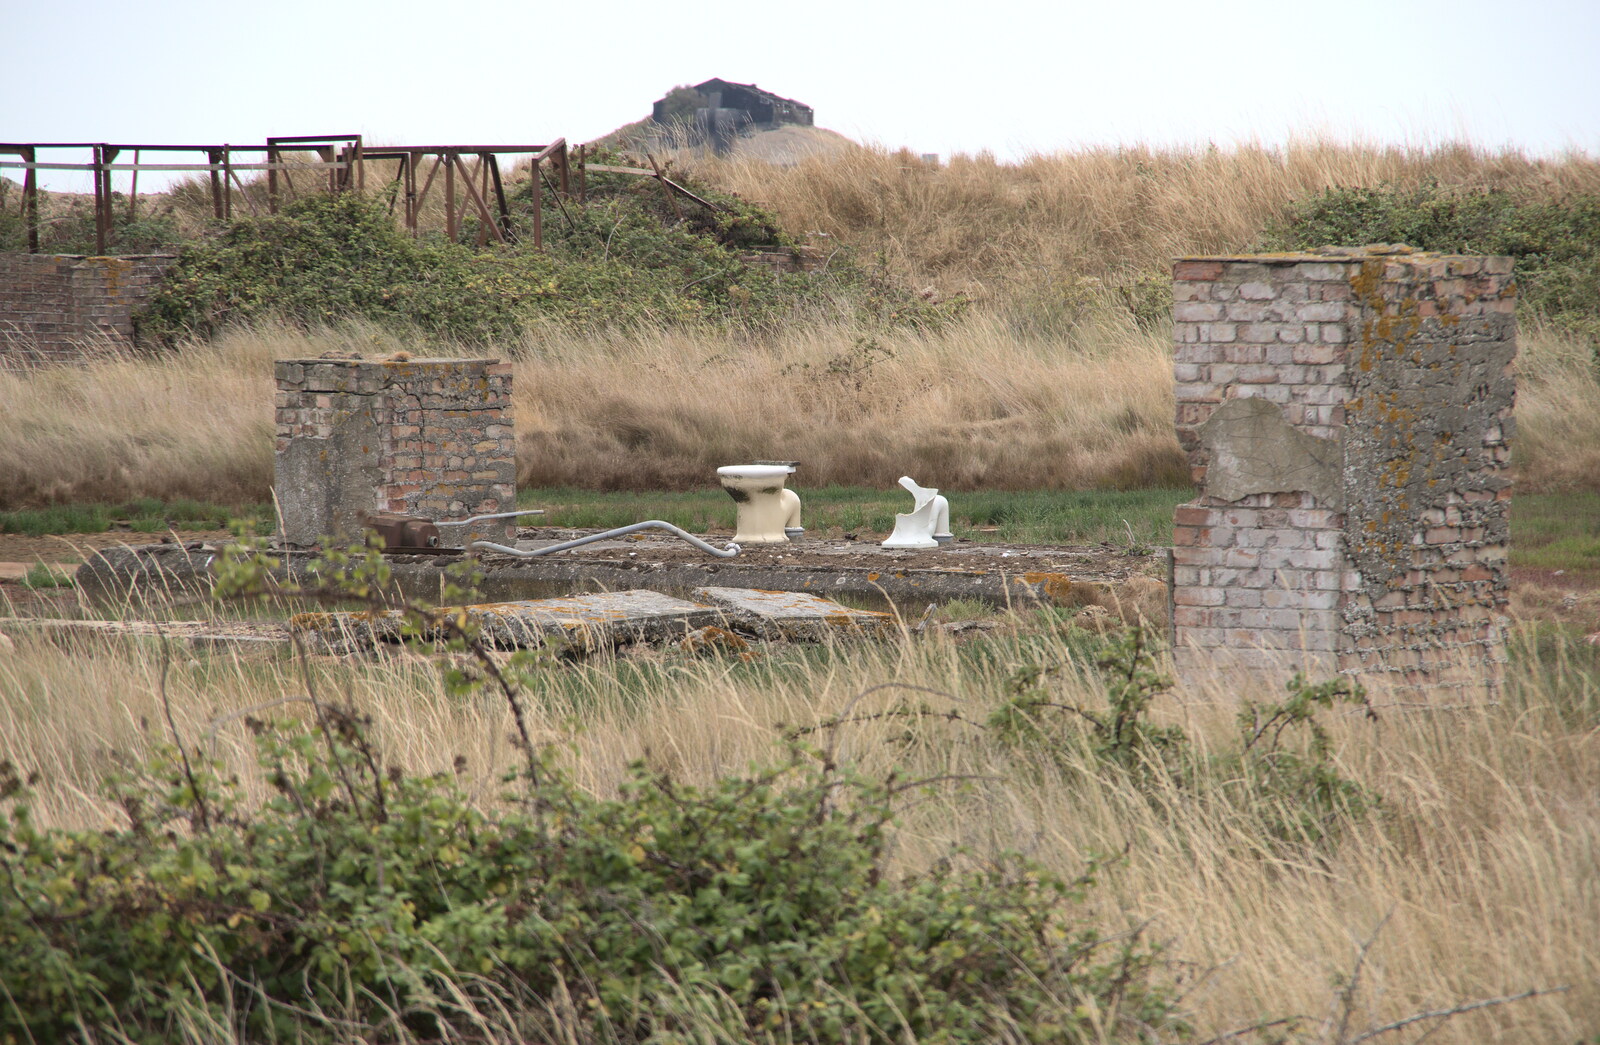 A toilet sits in the remains of an old building from A Trip to Orford Ness, Orford, Suffolk - 16th August 2022